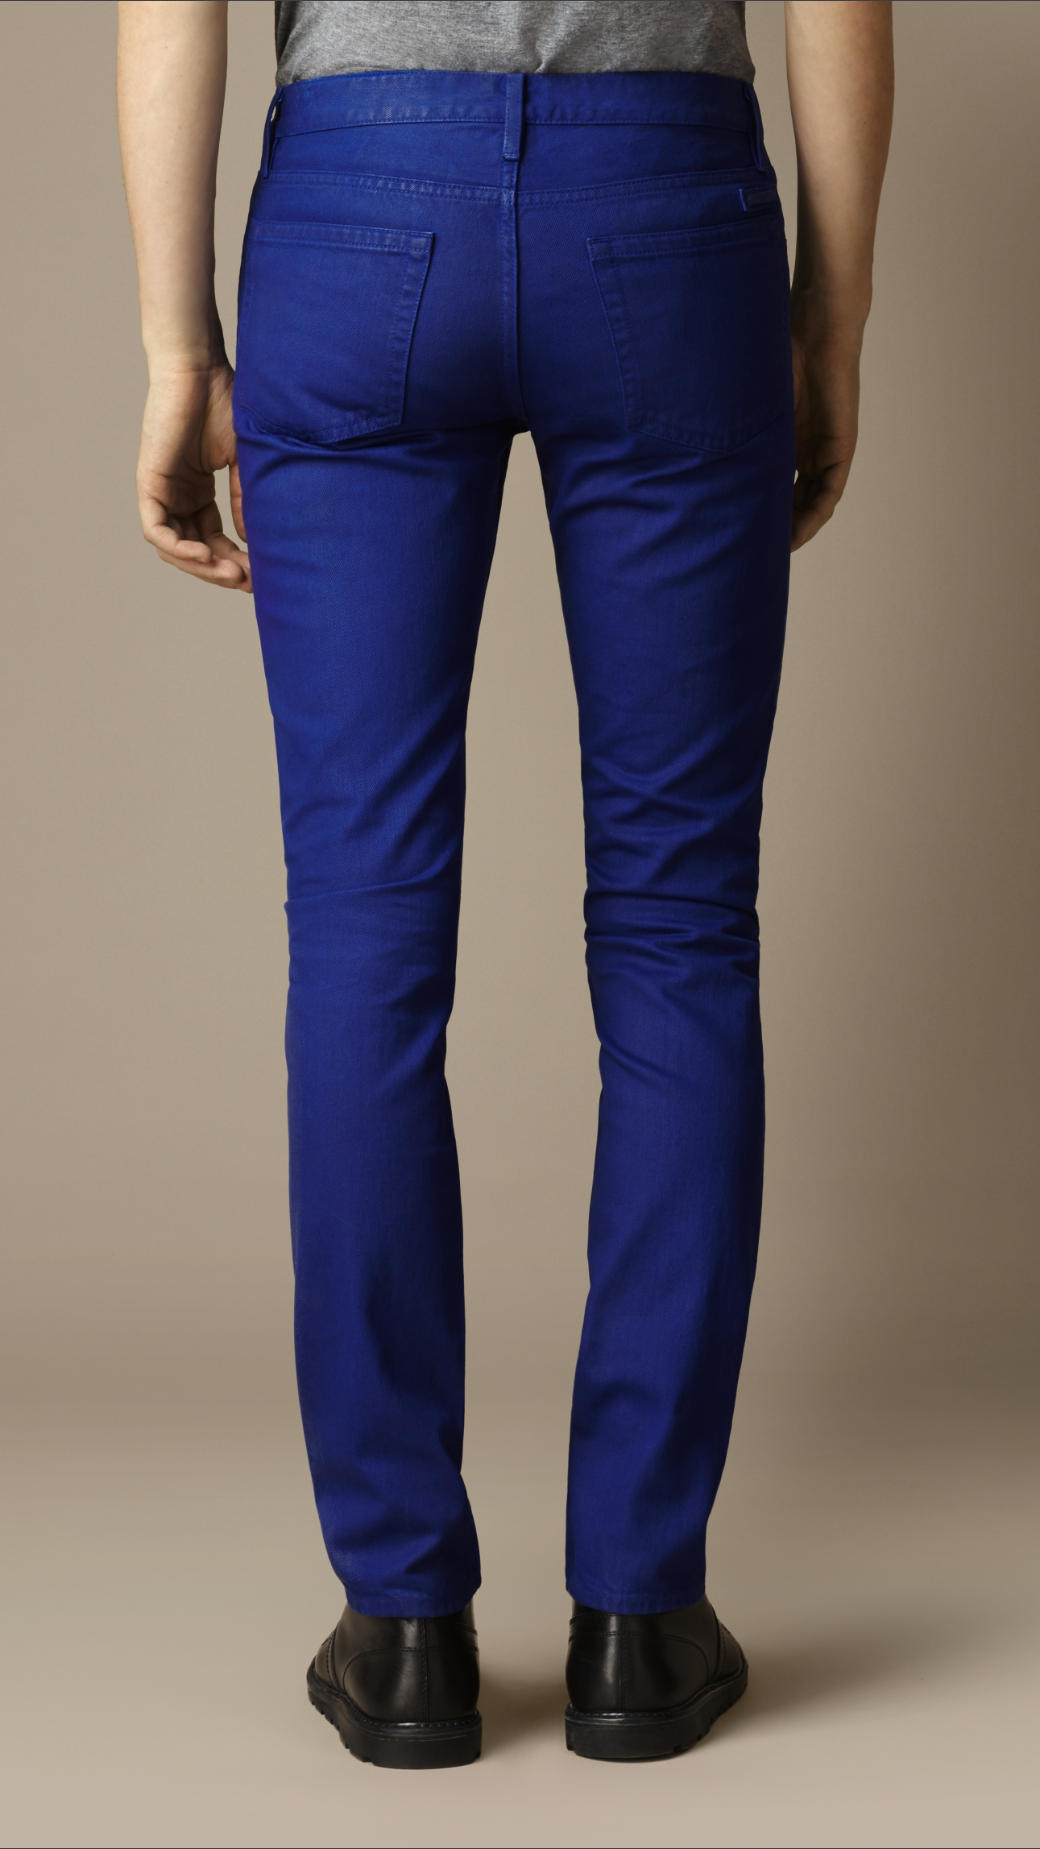 Lyst - Burberry Shoreditch Sprayed Skinny Fit Jeans in Blue for Men